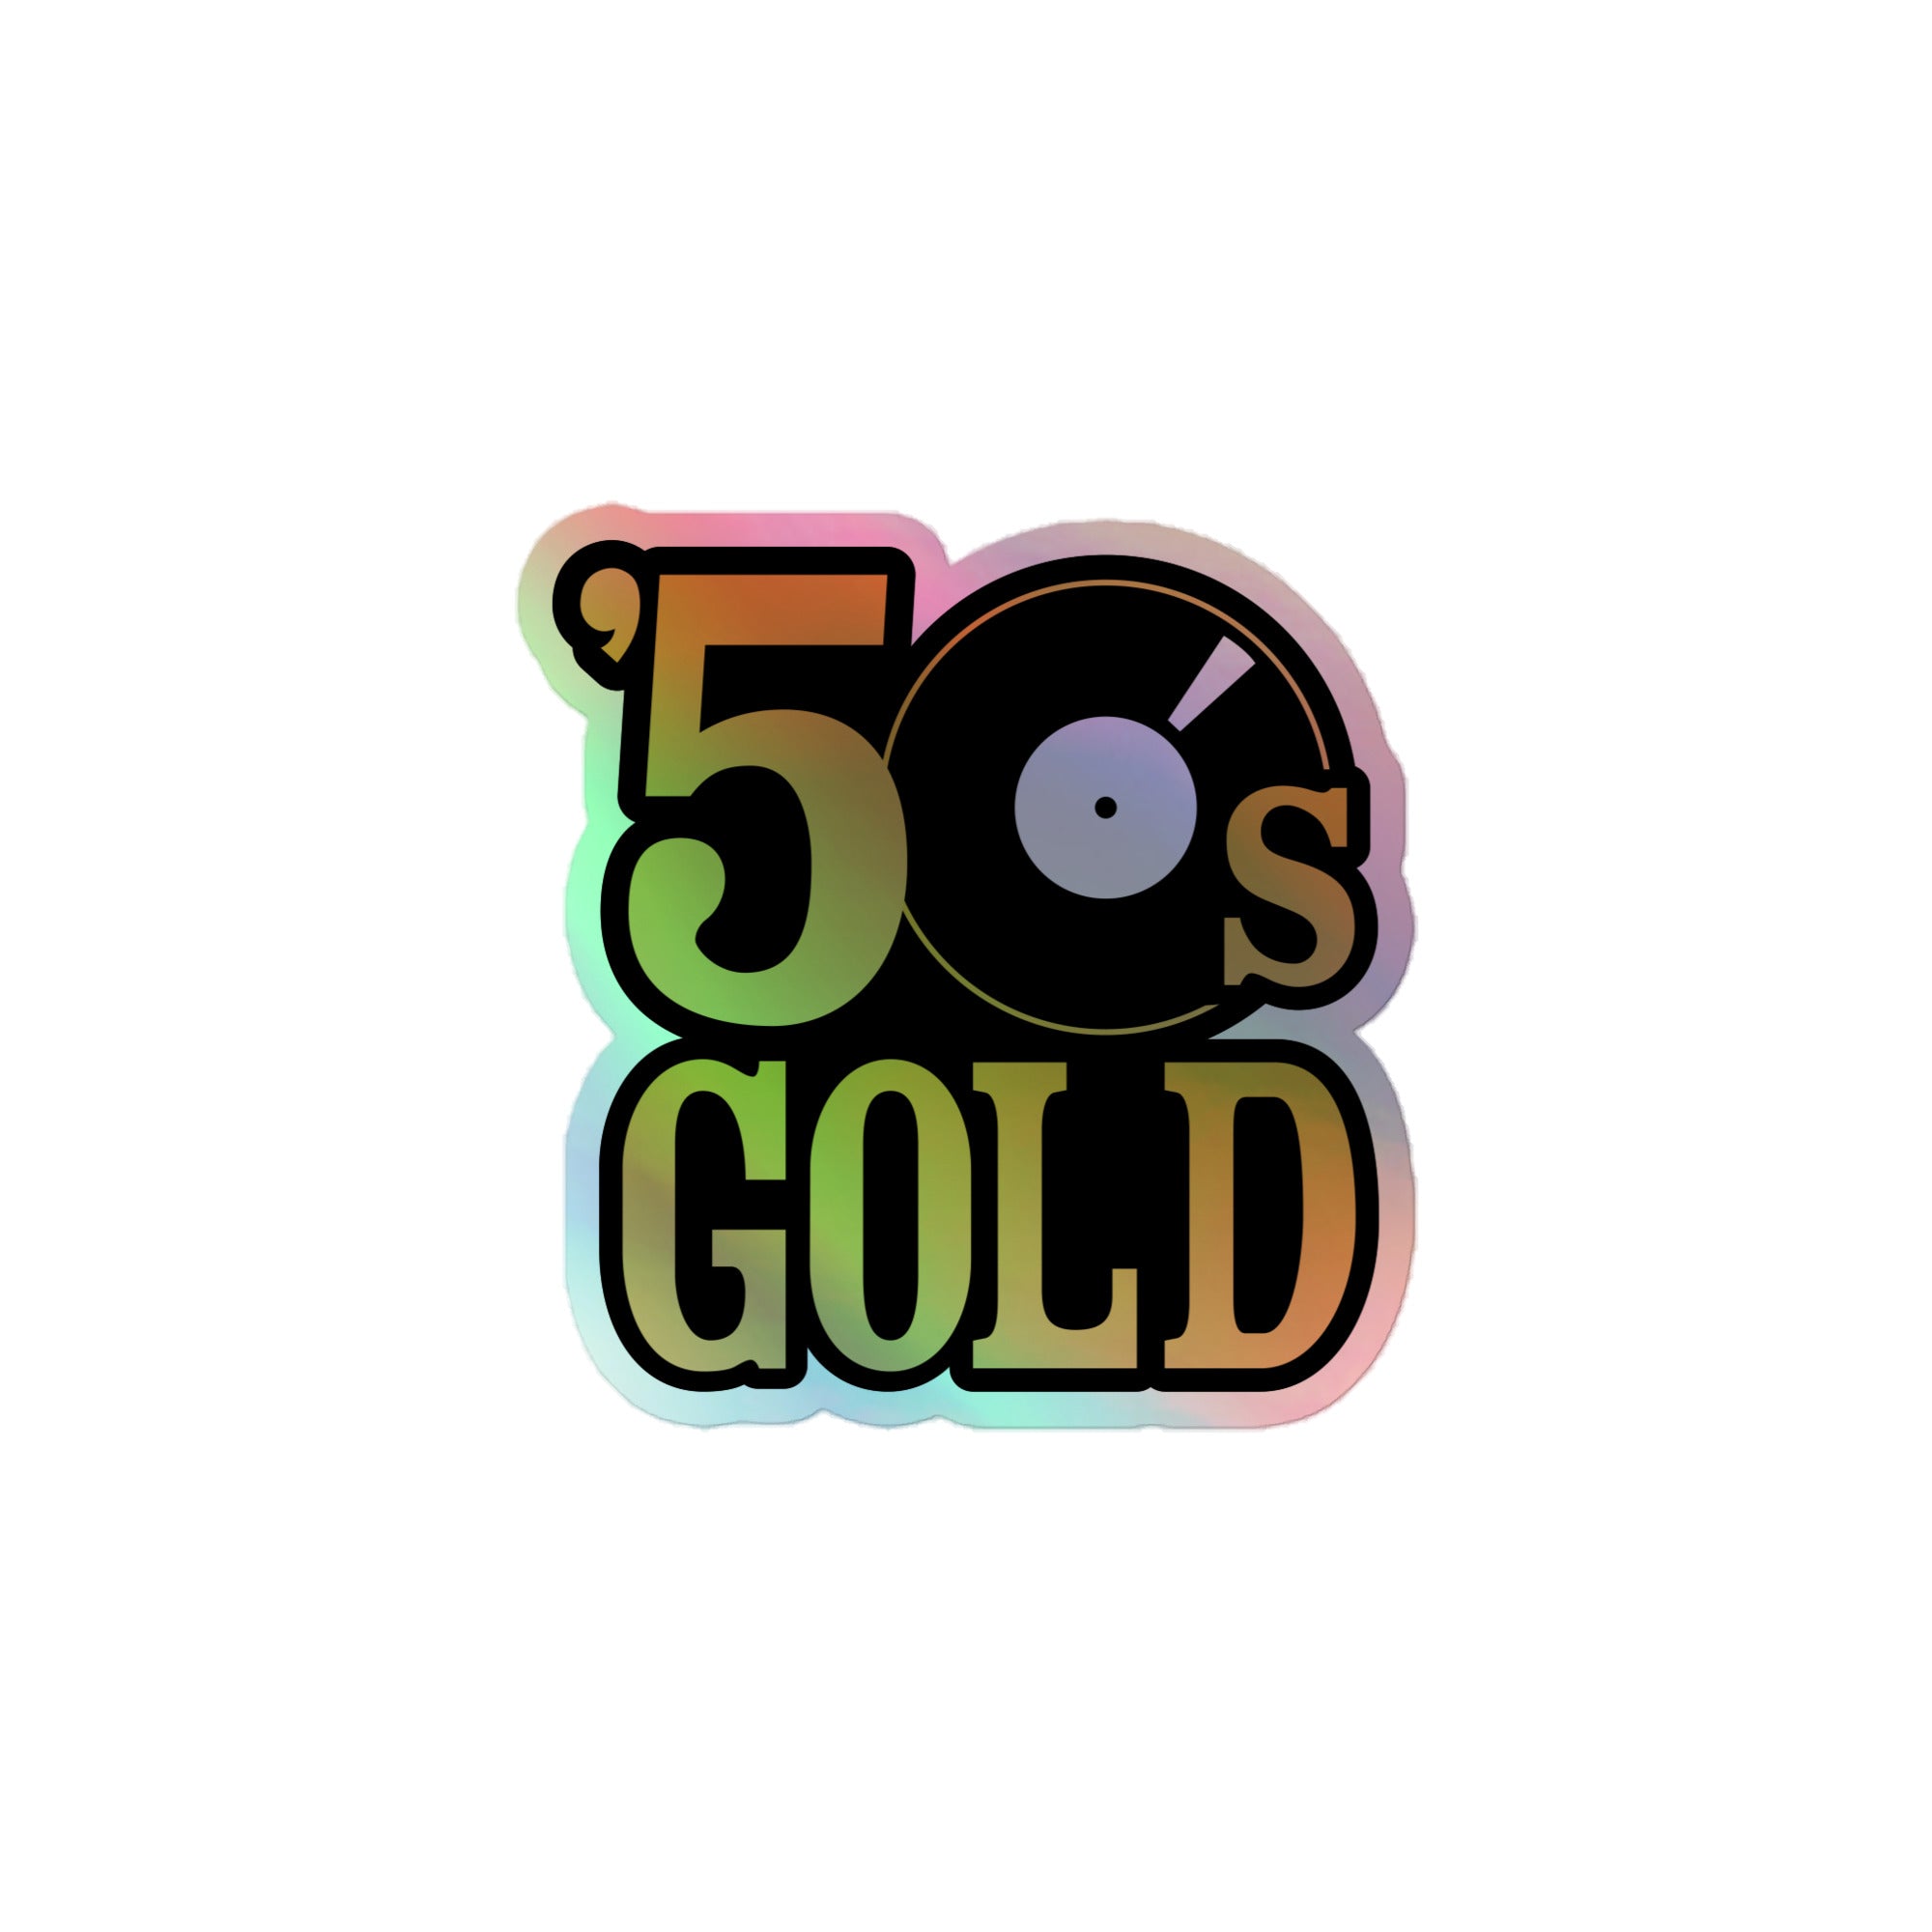 50s Gold: Holographic Sticker